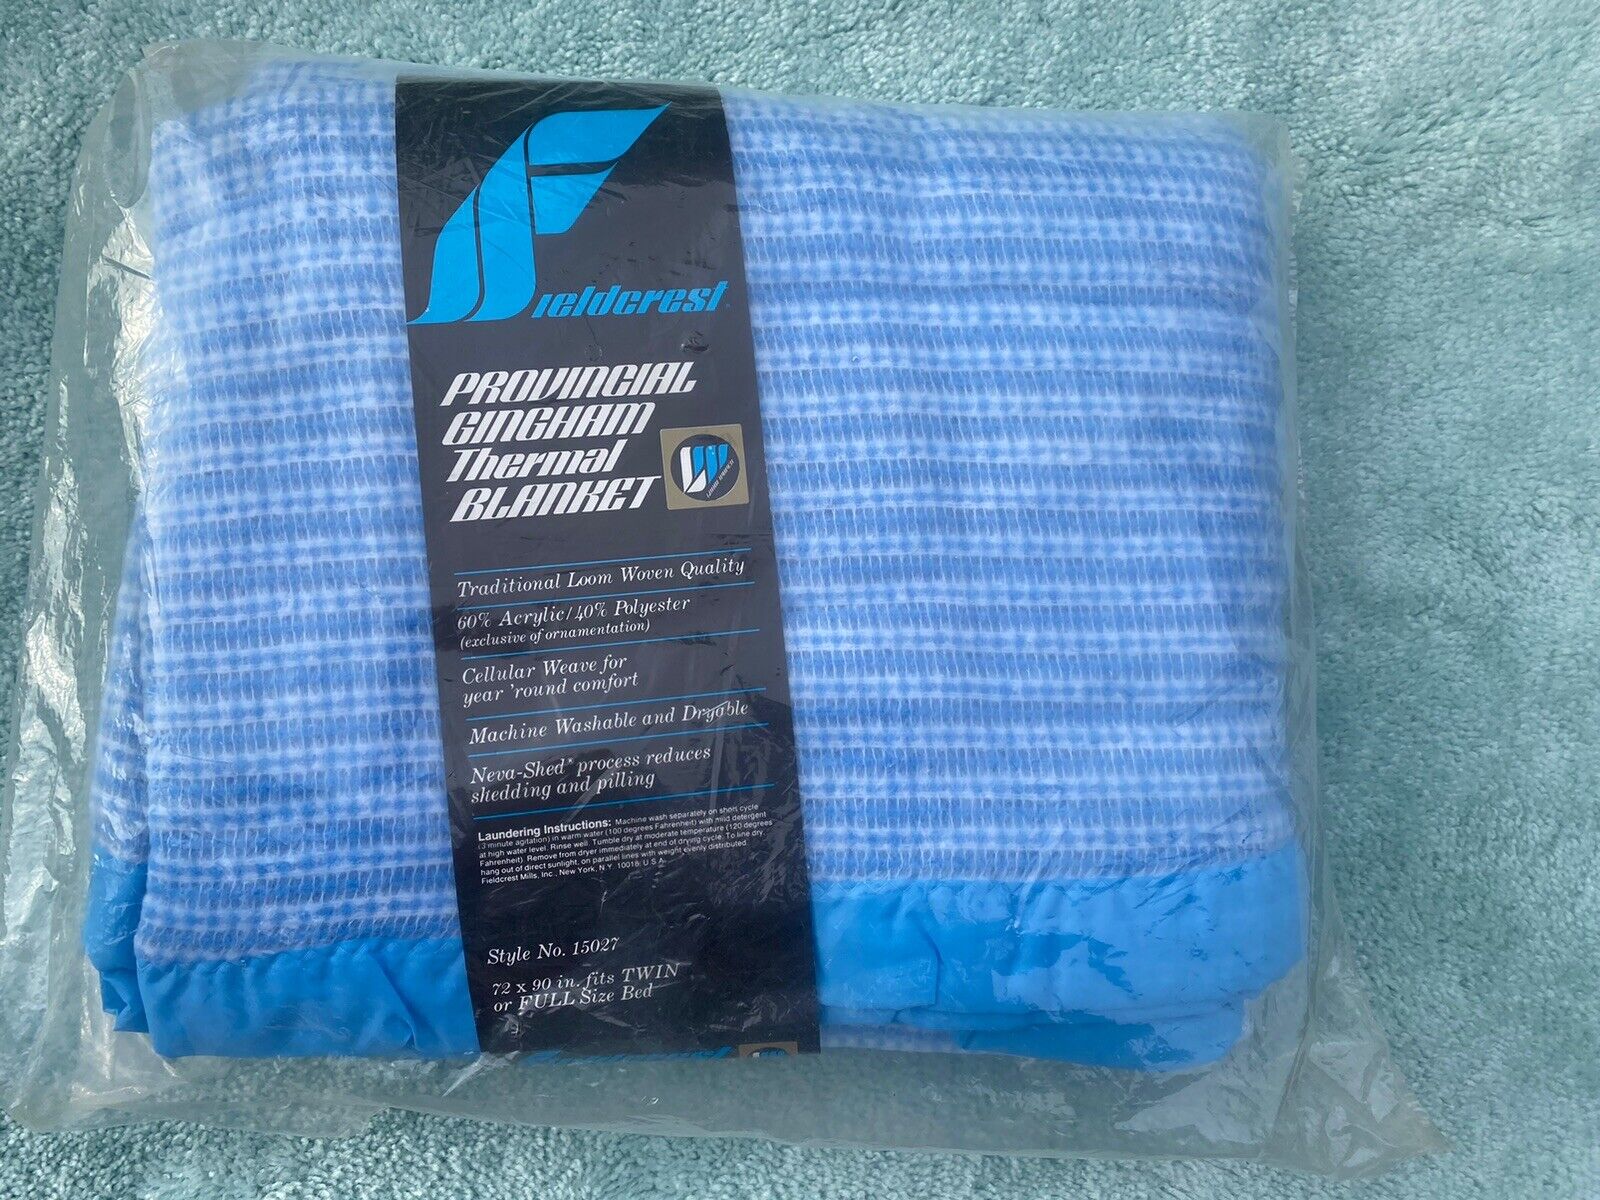 NOS FIELDCREST PROVINCIAL GINGHAM THERMAL BLANKET 72 X90 BLUE TWIN OR FULL